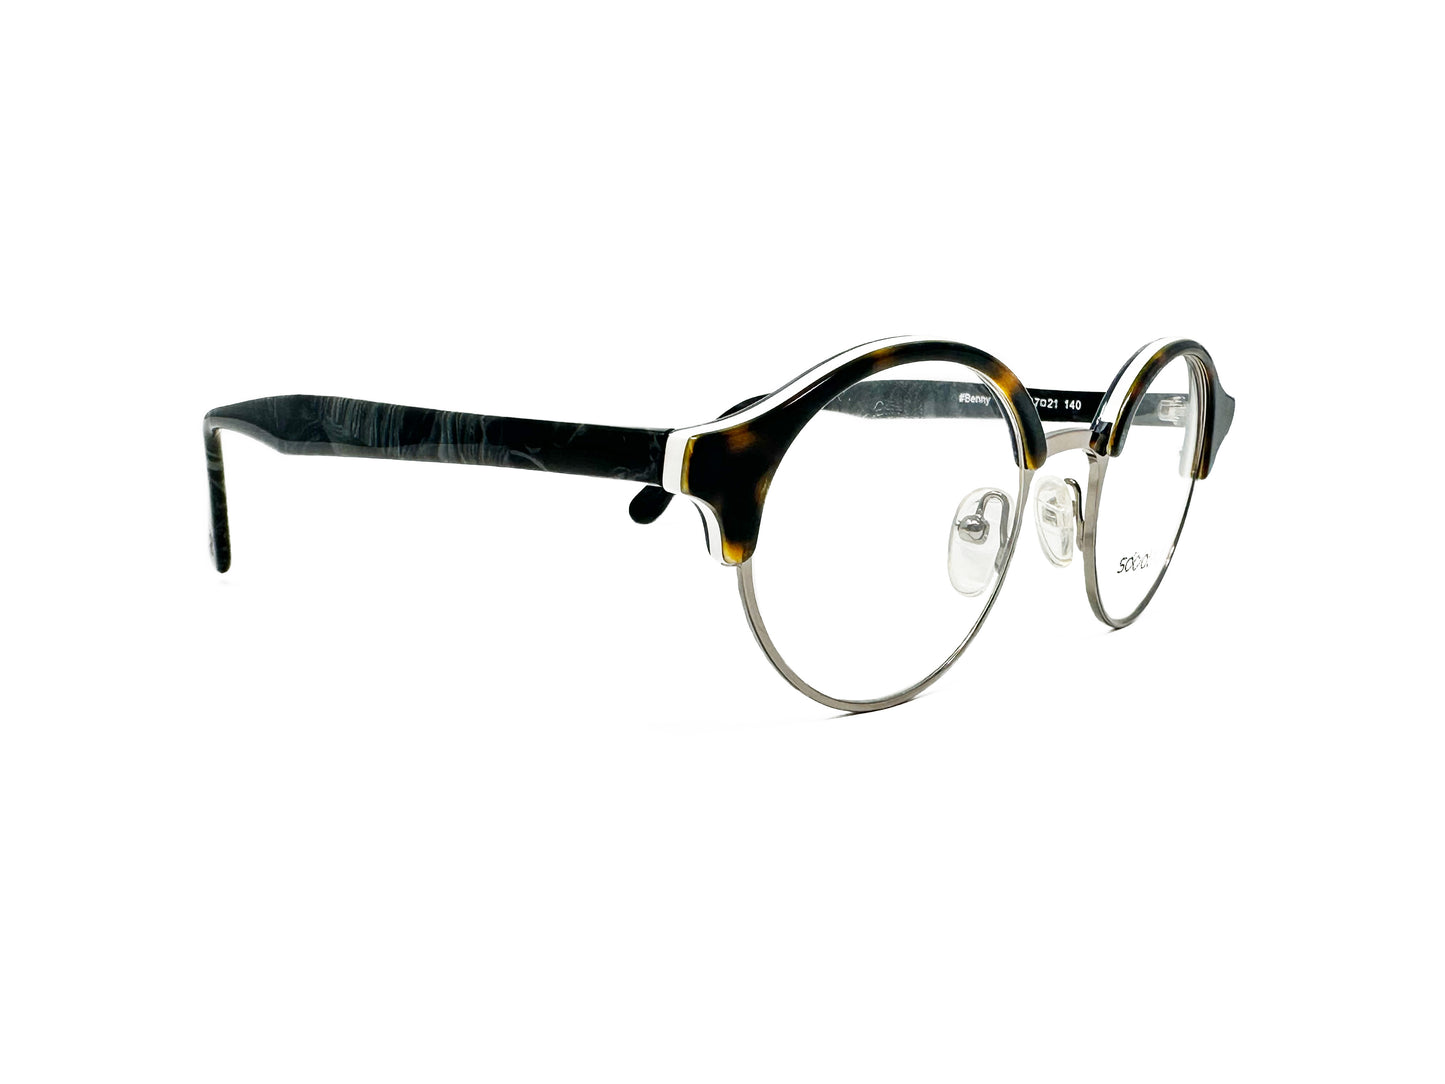 Social Eyes round metal, with acetate trim, optical frame. Model: Benny. Color: C04 - Dark Tortoise with white trim. Side view.